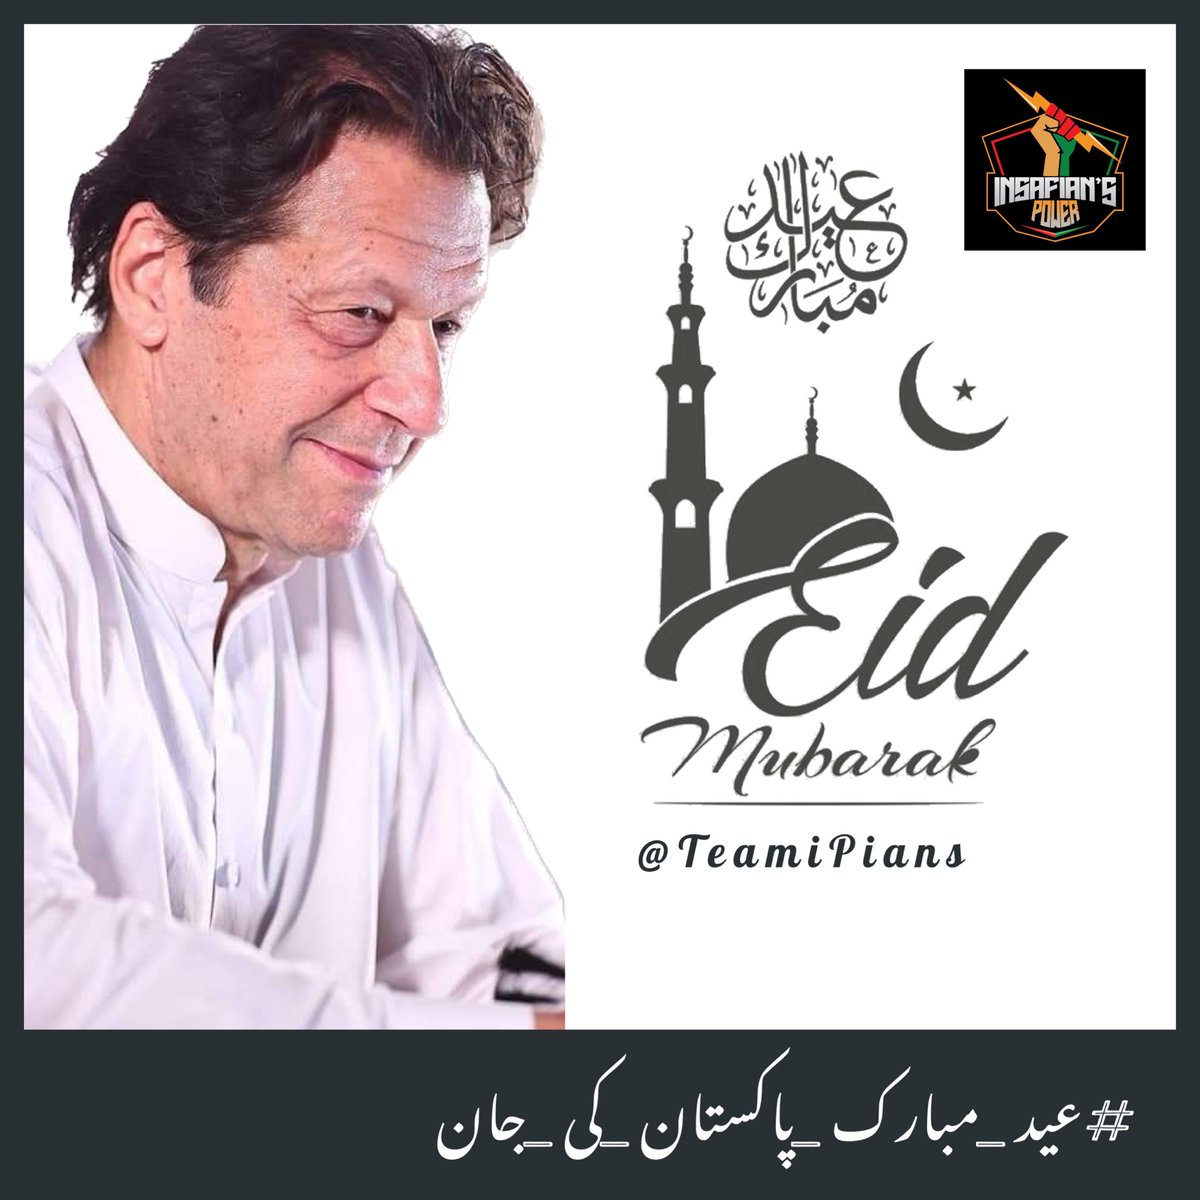 Spread happiness and brotherhood during this Eid and let Allah be your guide doing it. Eid Mubarak!
@TeamiPians
#عید_مبارک_پاکستان_کی_جان